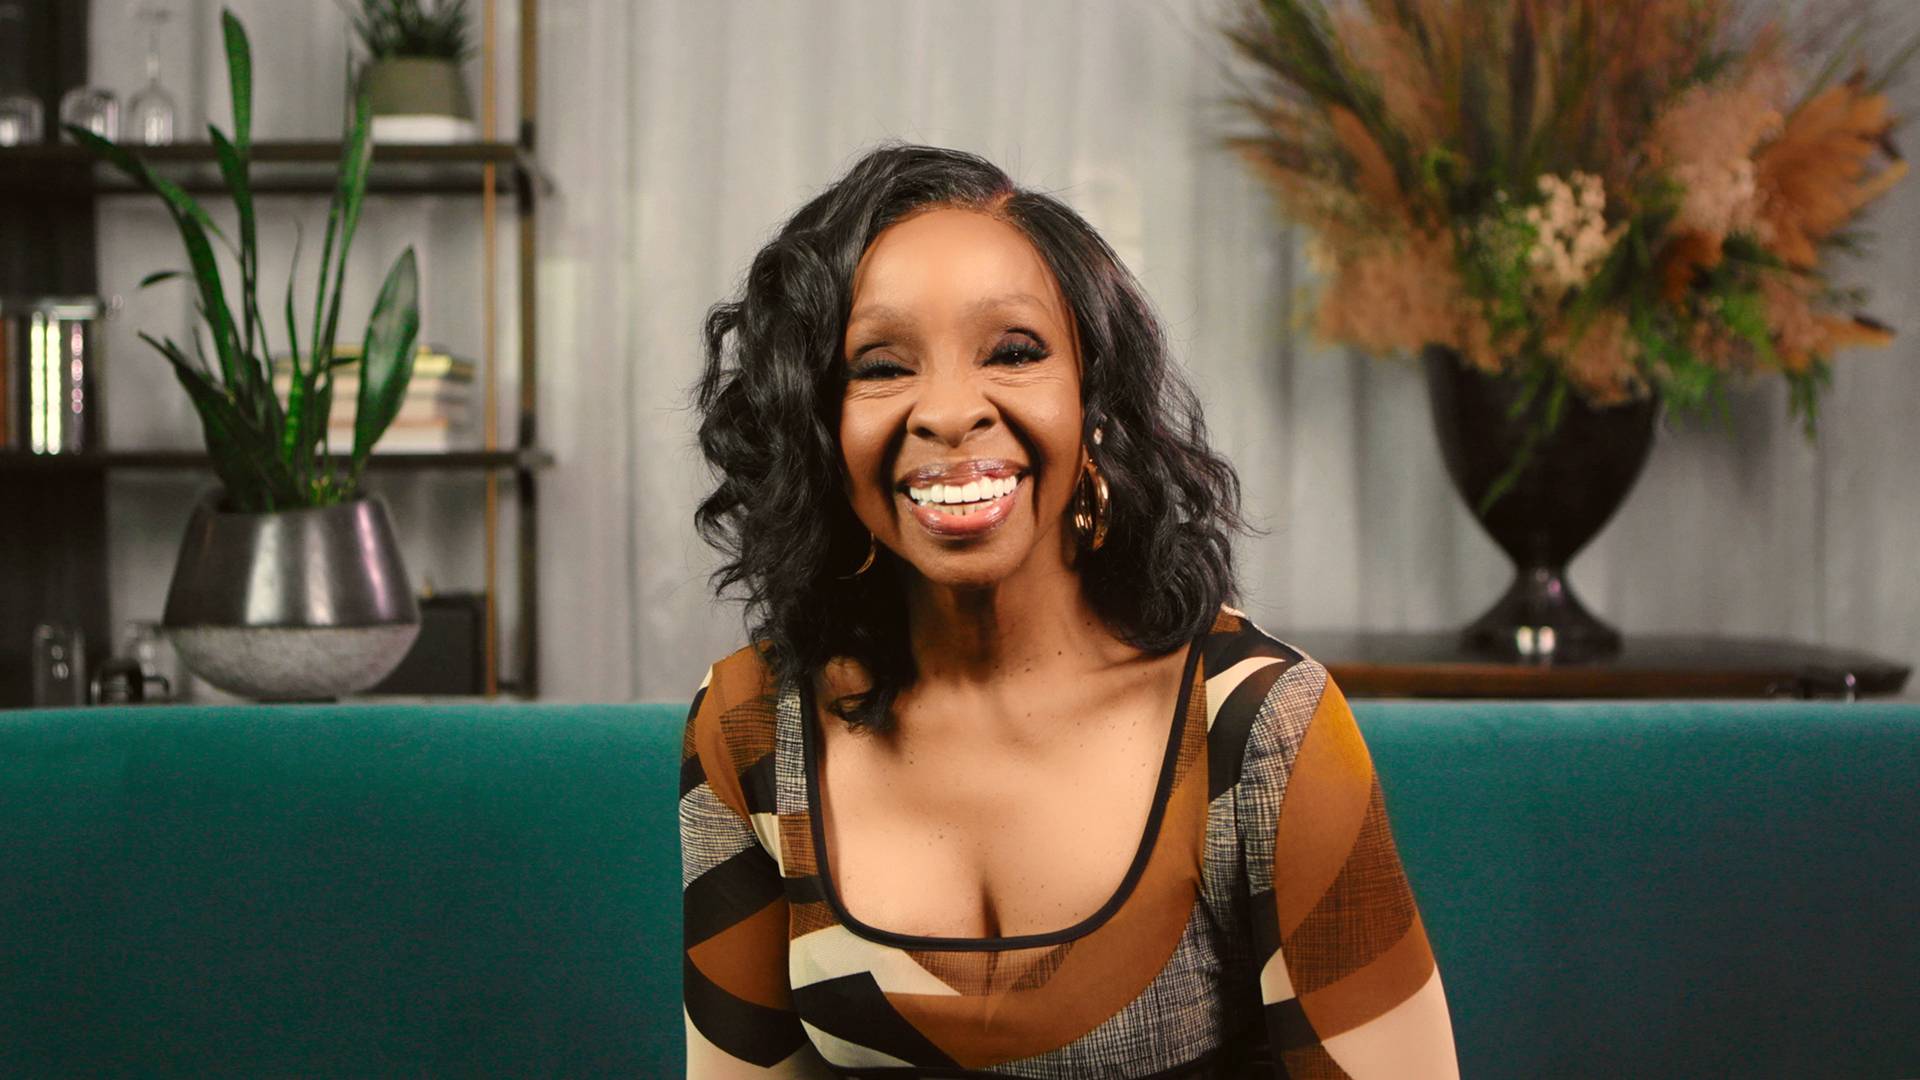 Gladys Knight on Pass the Mic: BET Mother's Day Edition 2021.